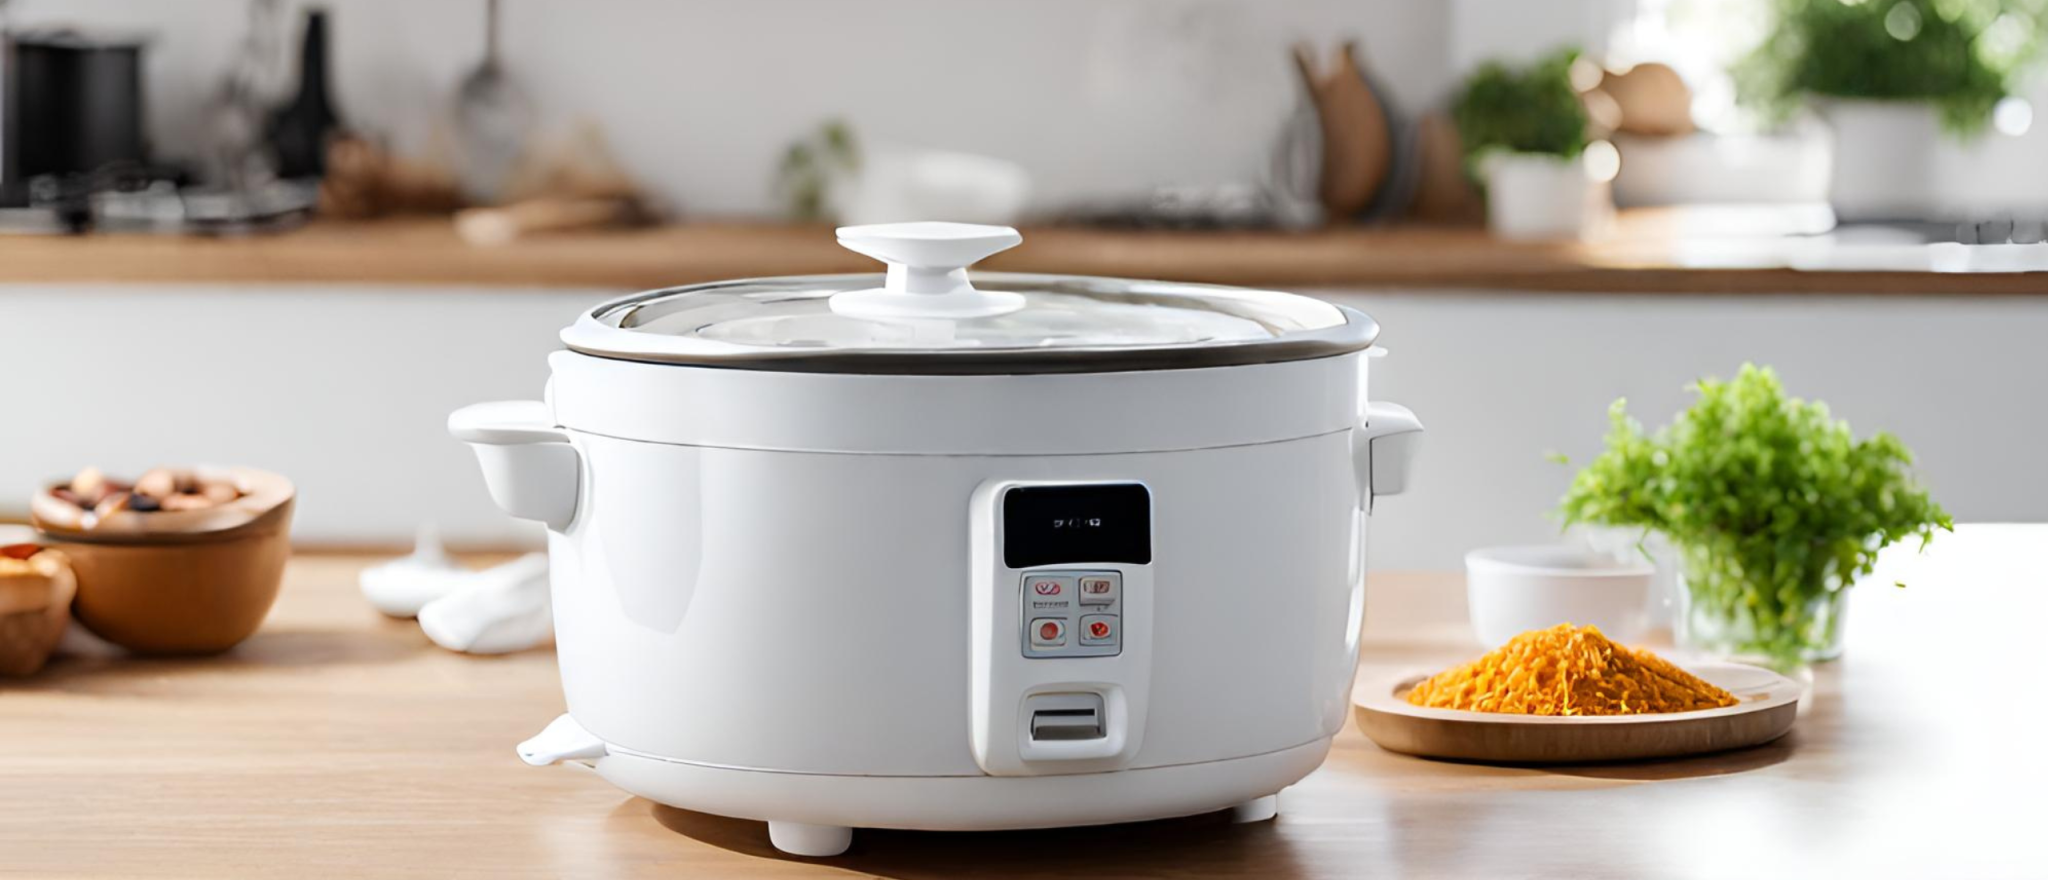 8 Rice Cookers That Really Are as Good as Redditors Say